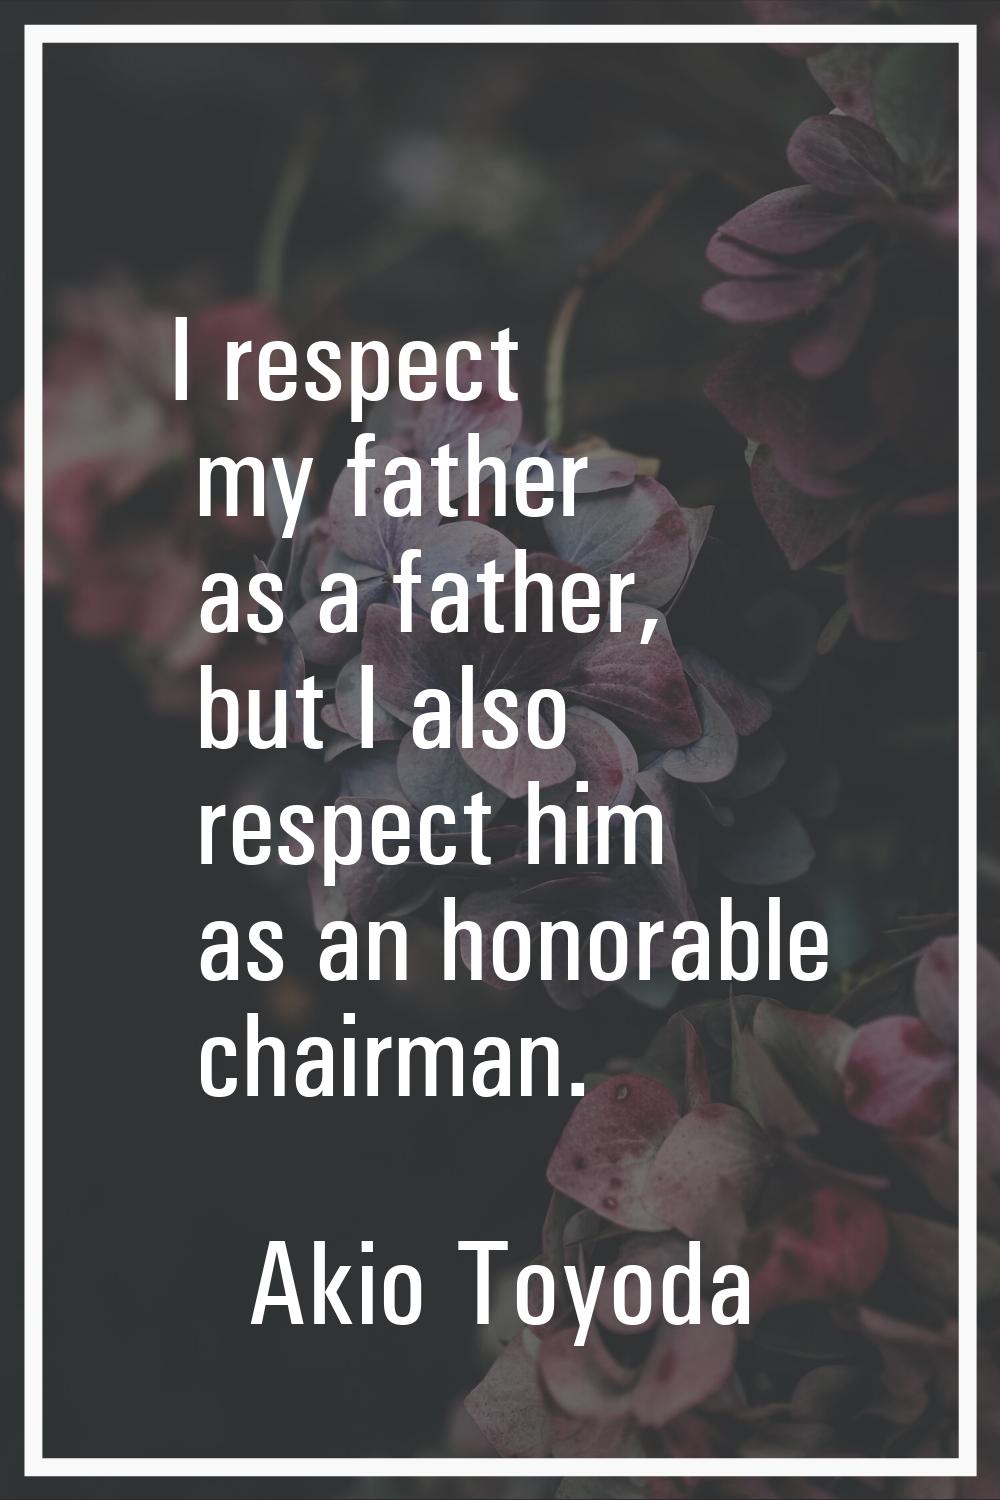 I respect my father as a father, but I also respect him as an honorable chairman.